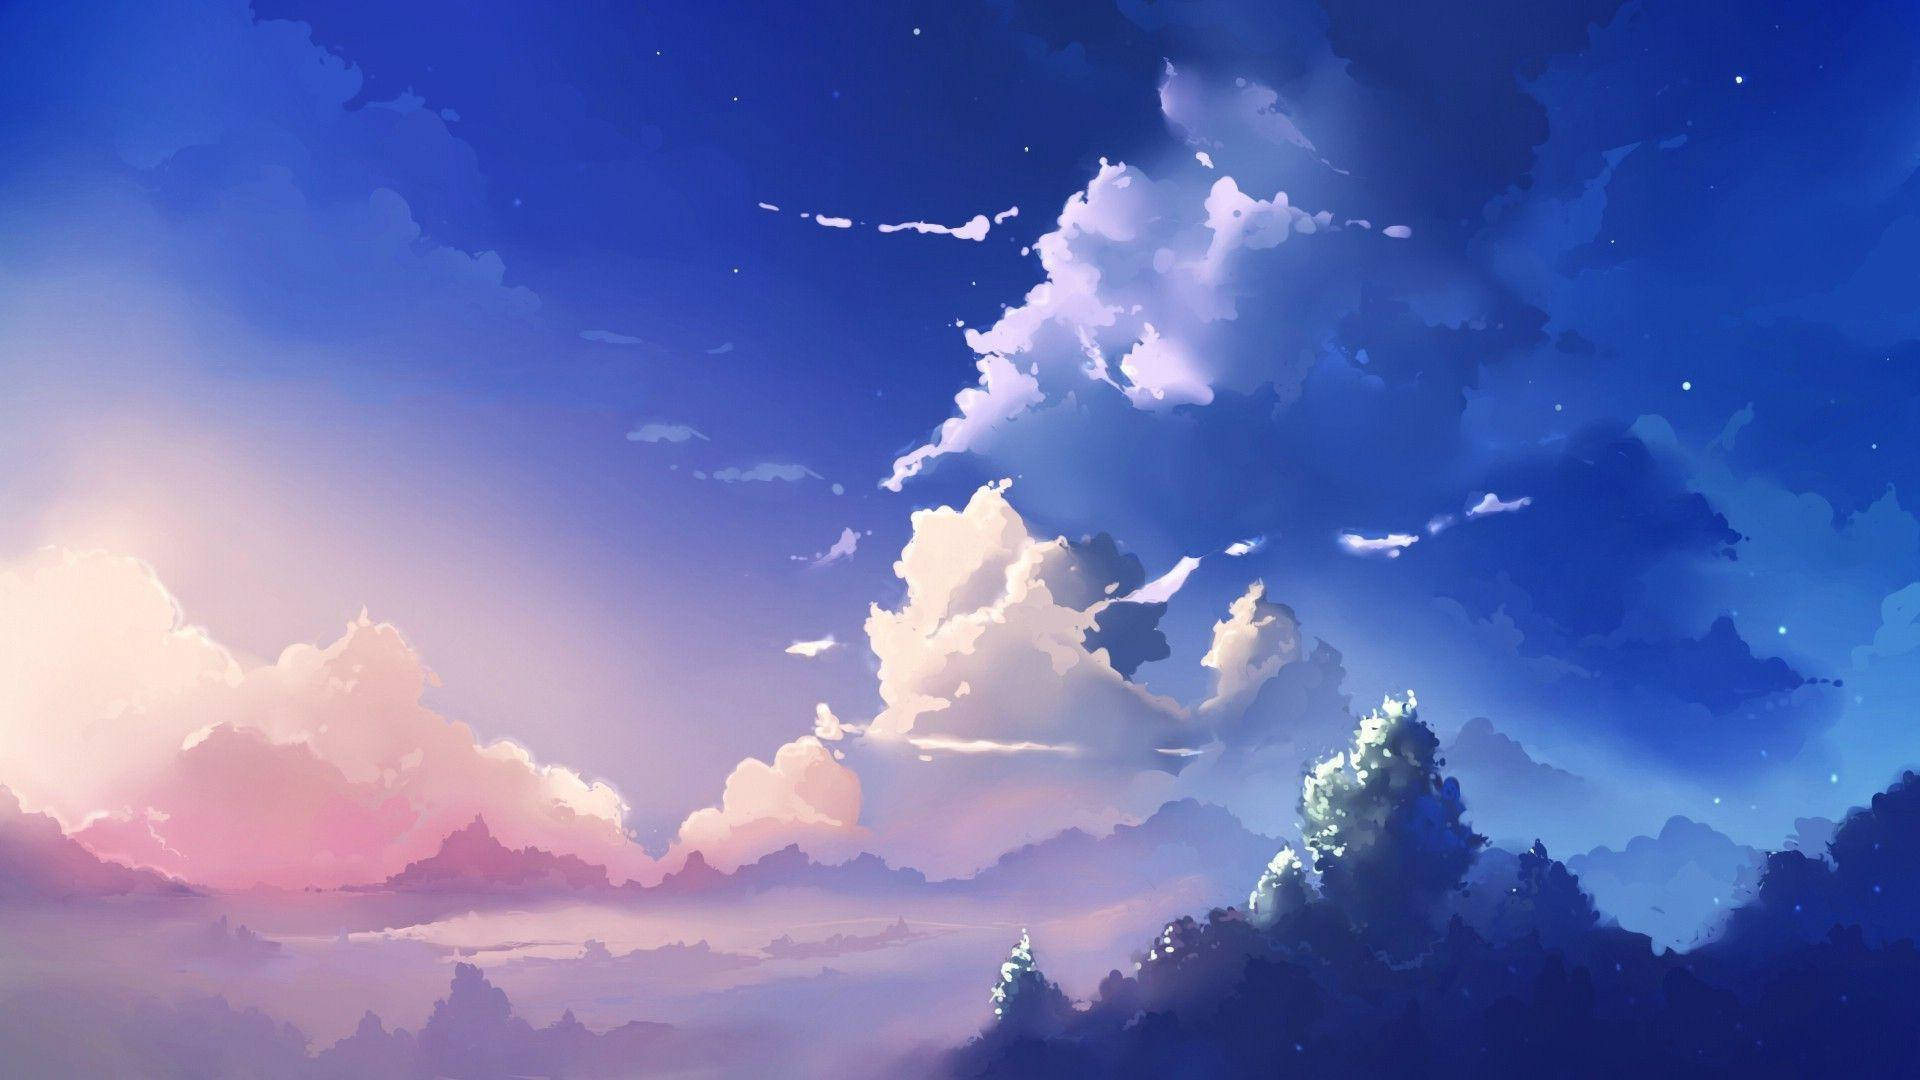 Purple Clouds Aesthetic Anime Scenery Background